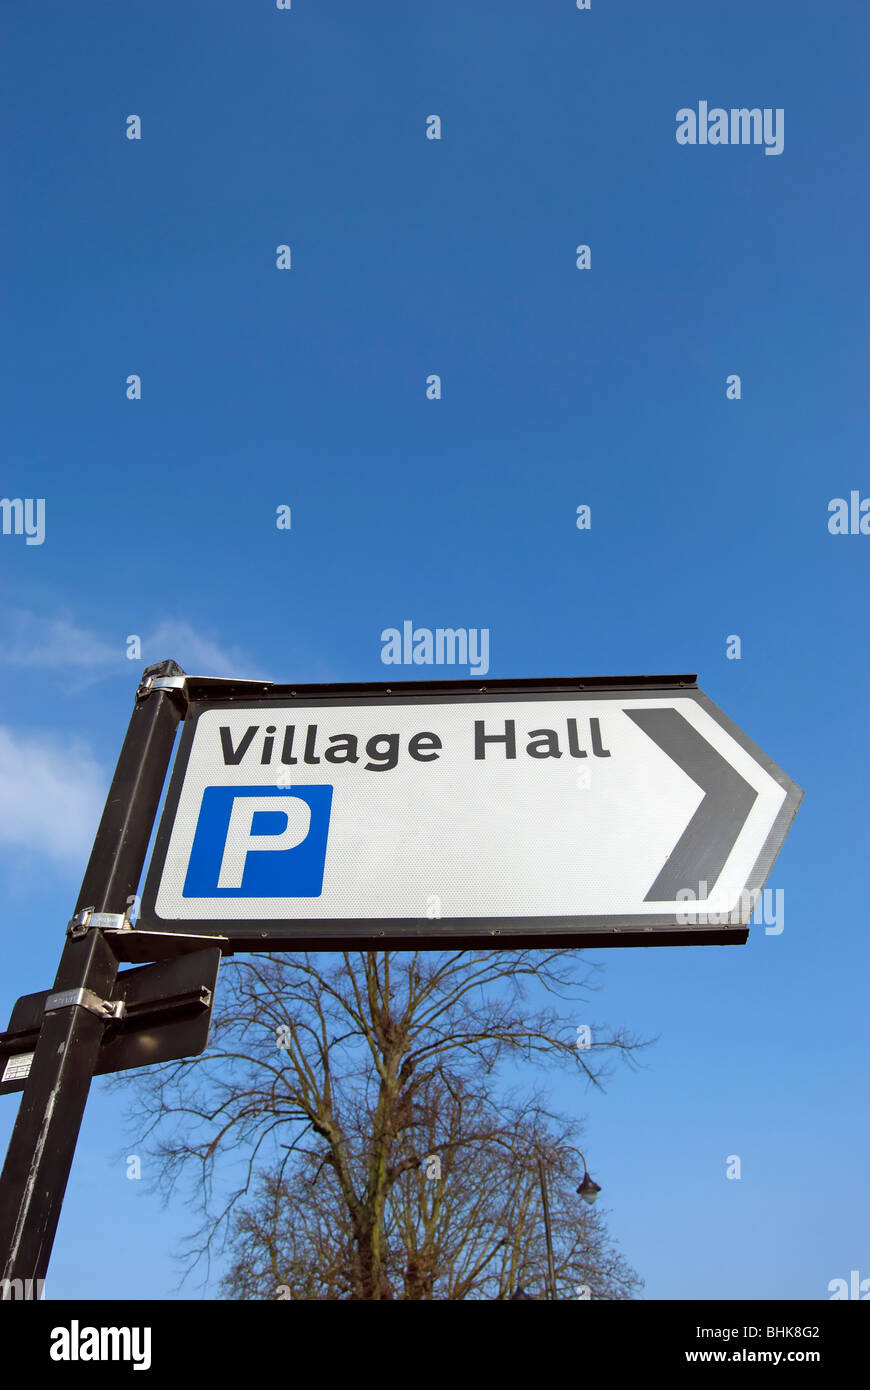 parking and village hall sign in shepperton, middlesex, england Stock Photo